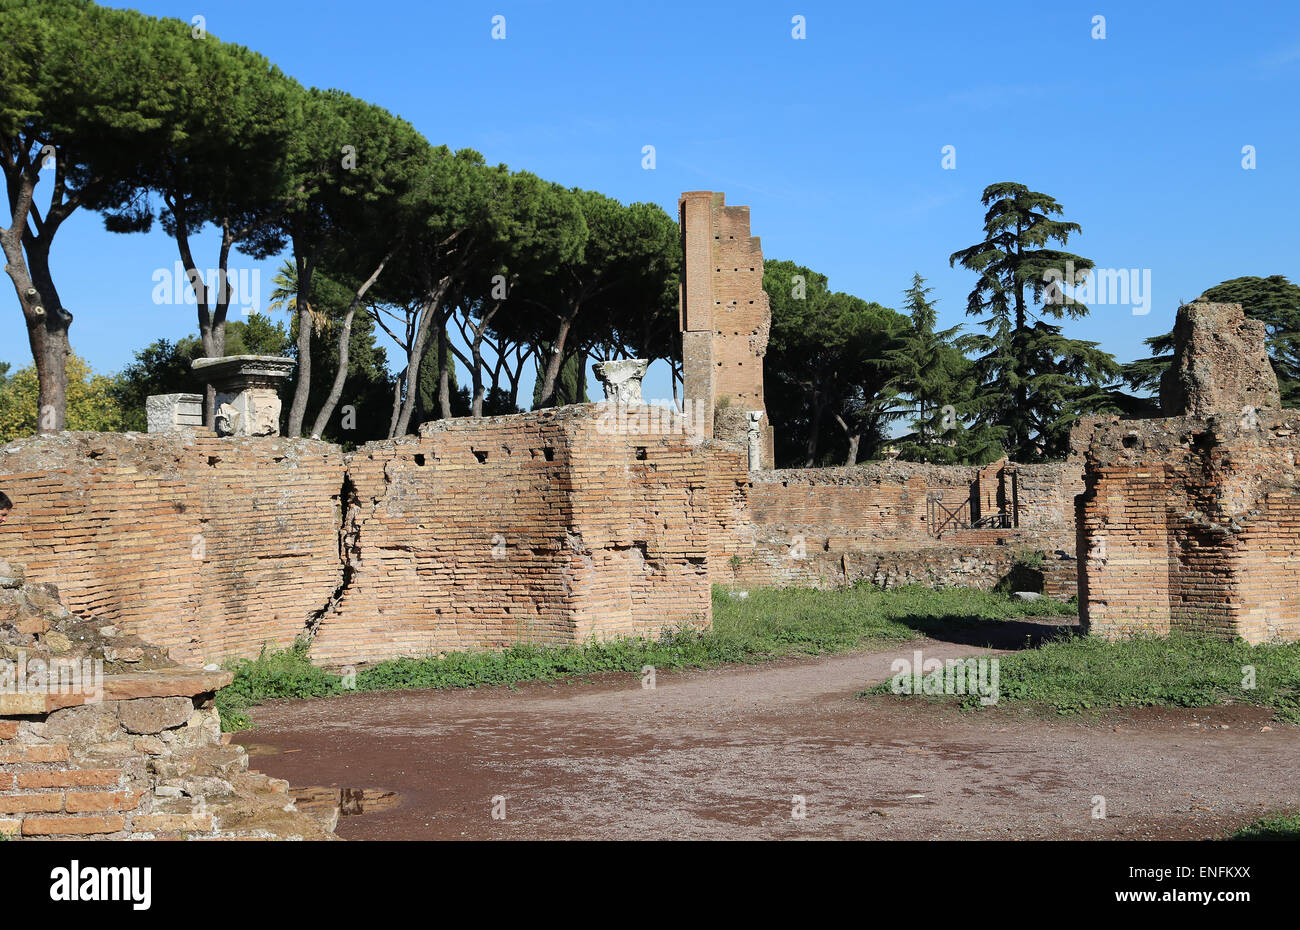 Italy. Rome. Imperial Palace. Palatine Hill. Ruins. 1st. Ad. Stock Photo